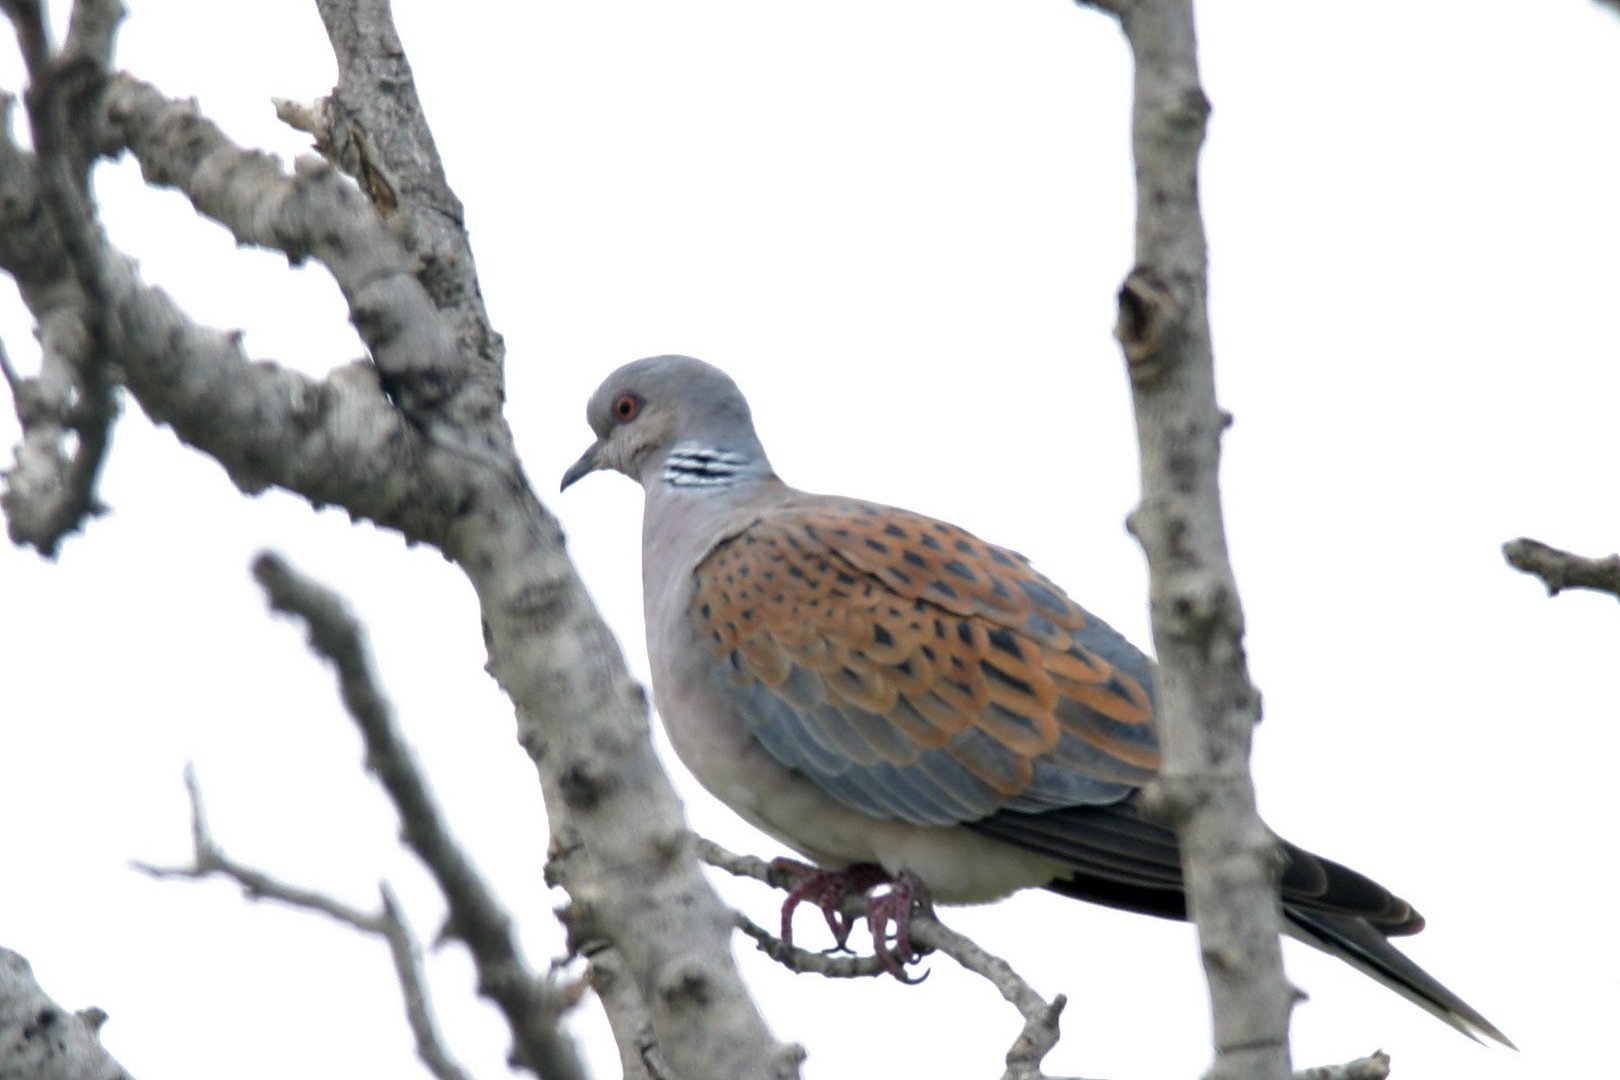 image Hunters warned over turtle dove limit